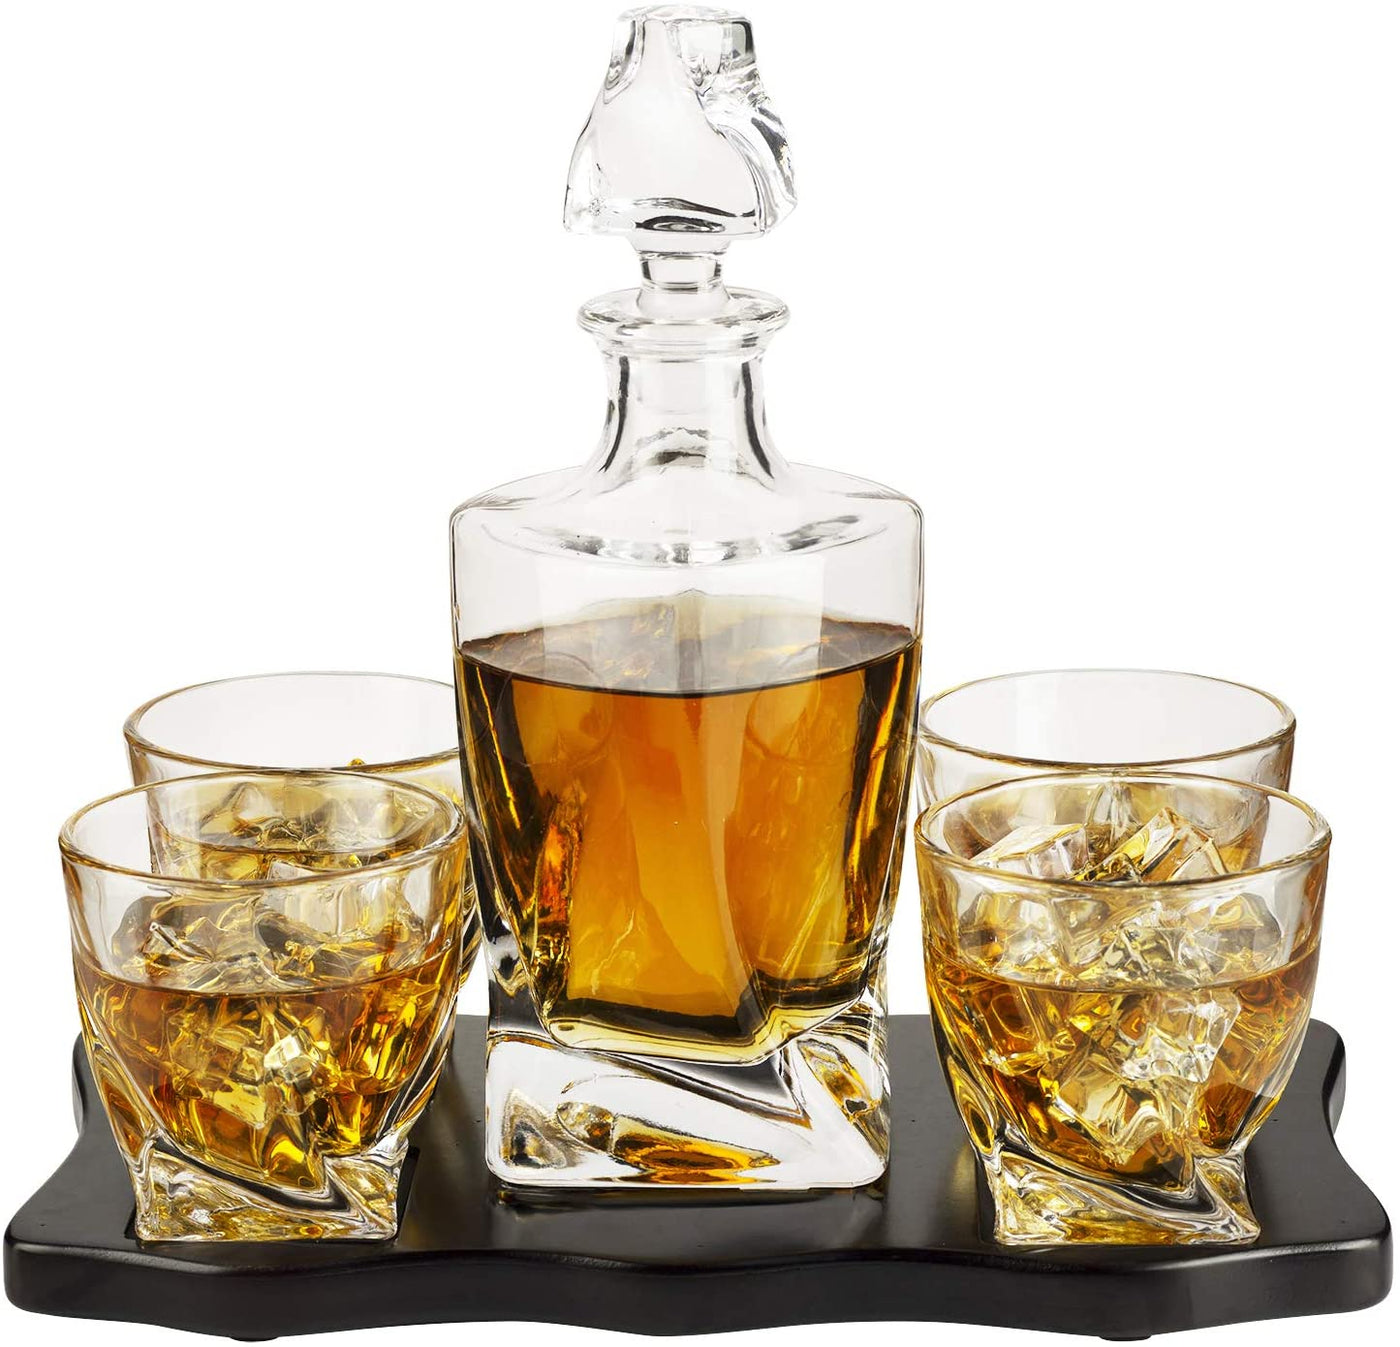 Liquor Lux Italian Crafted Crystal 5 Piece European Style Wine & Whiskey Decanter 855ml with 4 Glasses & Wood Sophisticated Tray Set Spirits, Scotch, & Bourbon Whiskey Decanter Sets for Men